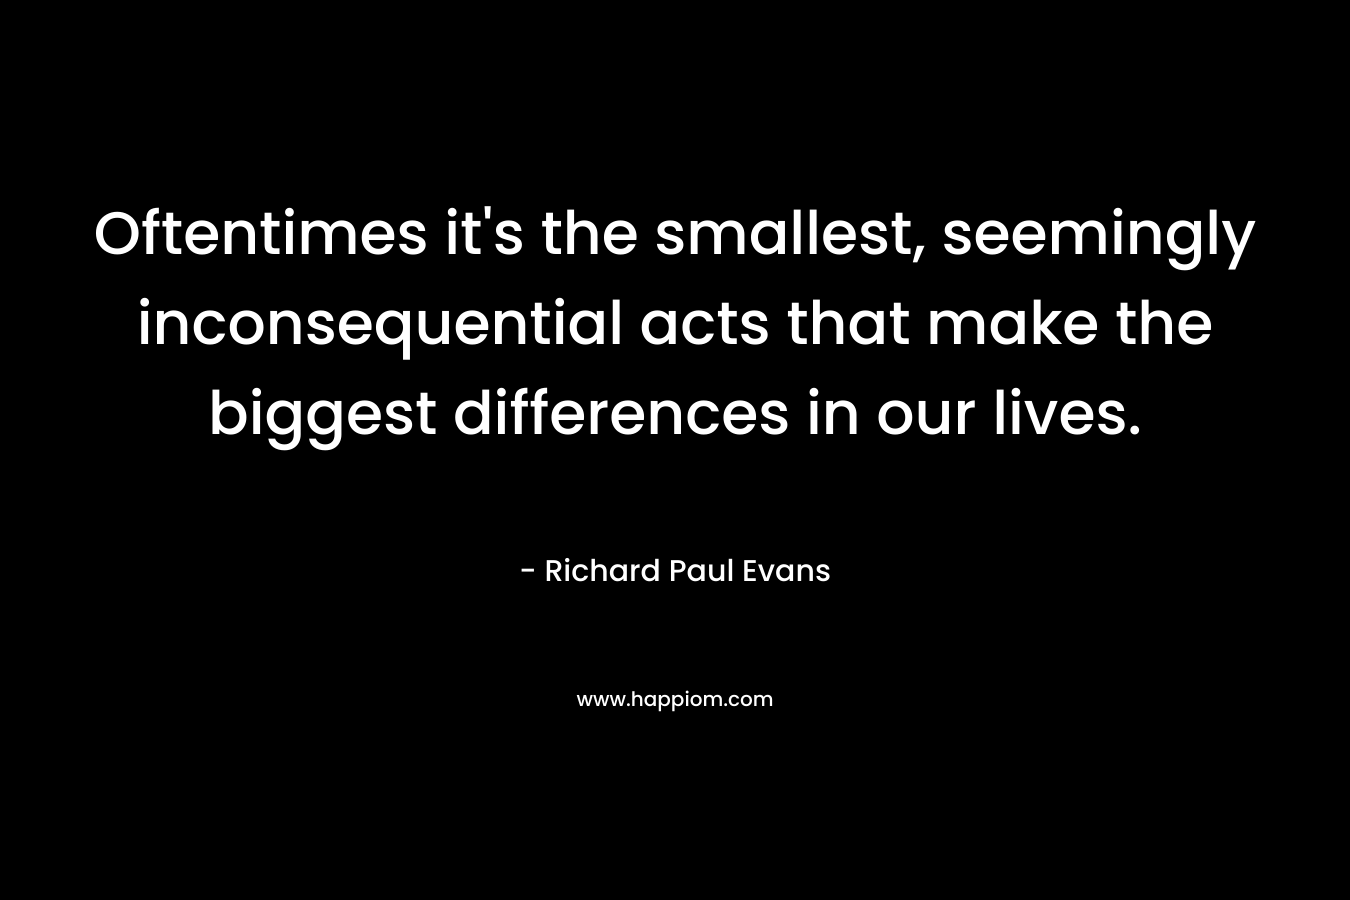 Oftentimes it's the smallest, seemingly inconsequential acts that make the biggest differences in our lives.